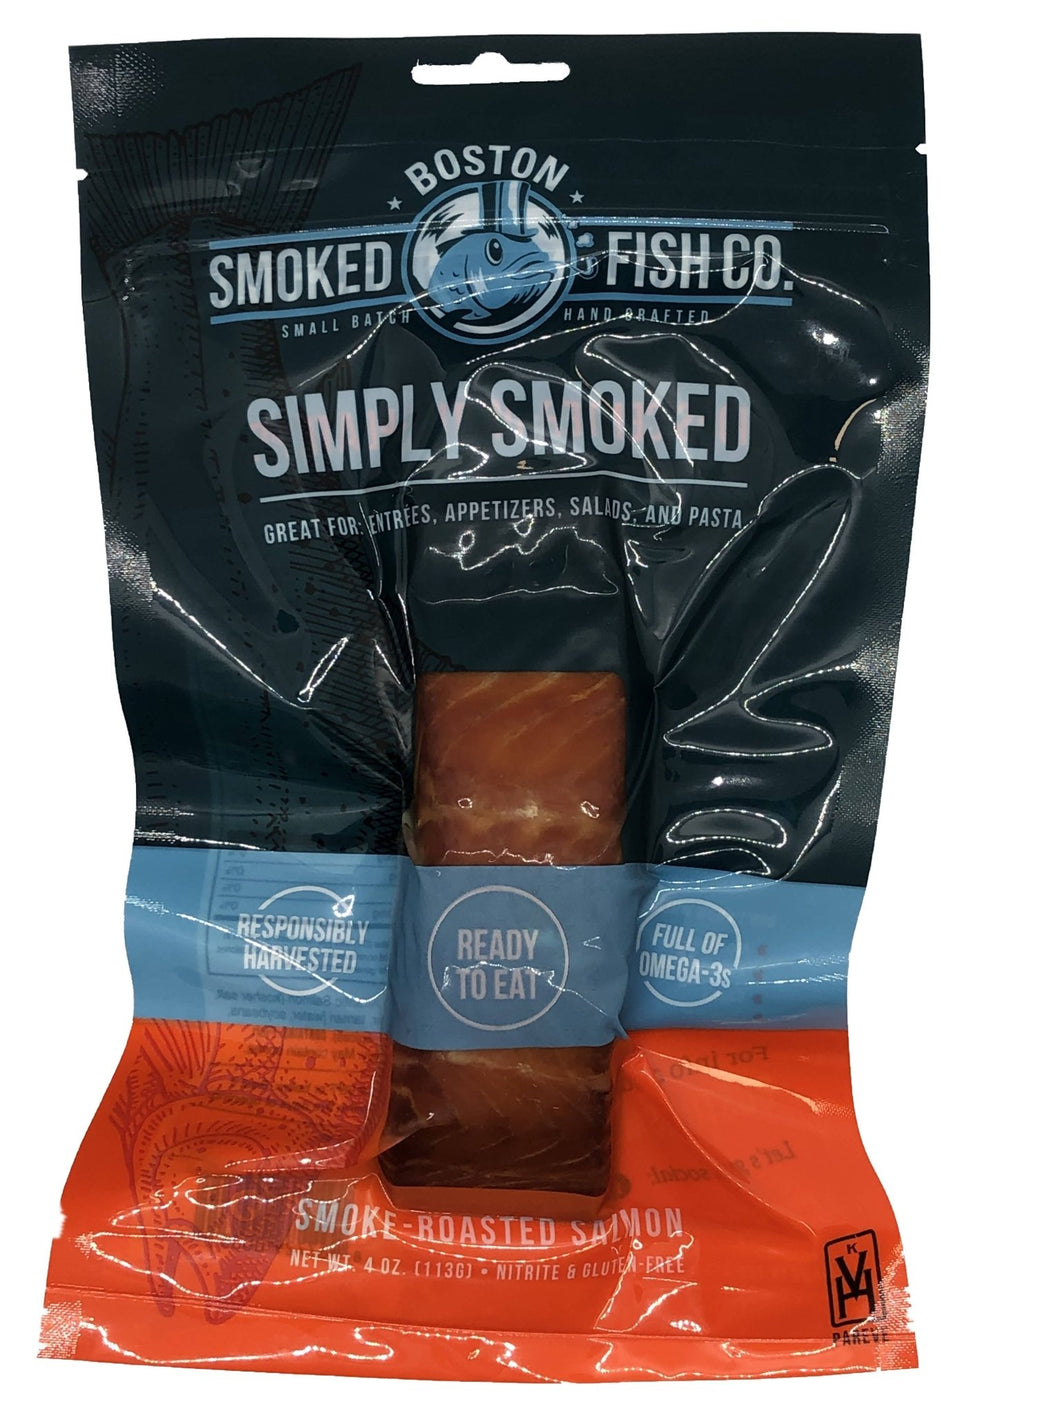 Boston Smoked Fish Co - Boston Smoked Fish Co’s Smoked Salmon Portions (Hot Smoked) - 12 x 4 oz - Seafood | Delivery near me in ... Farm2Me #url#